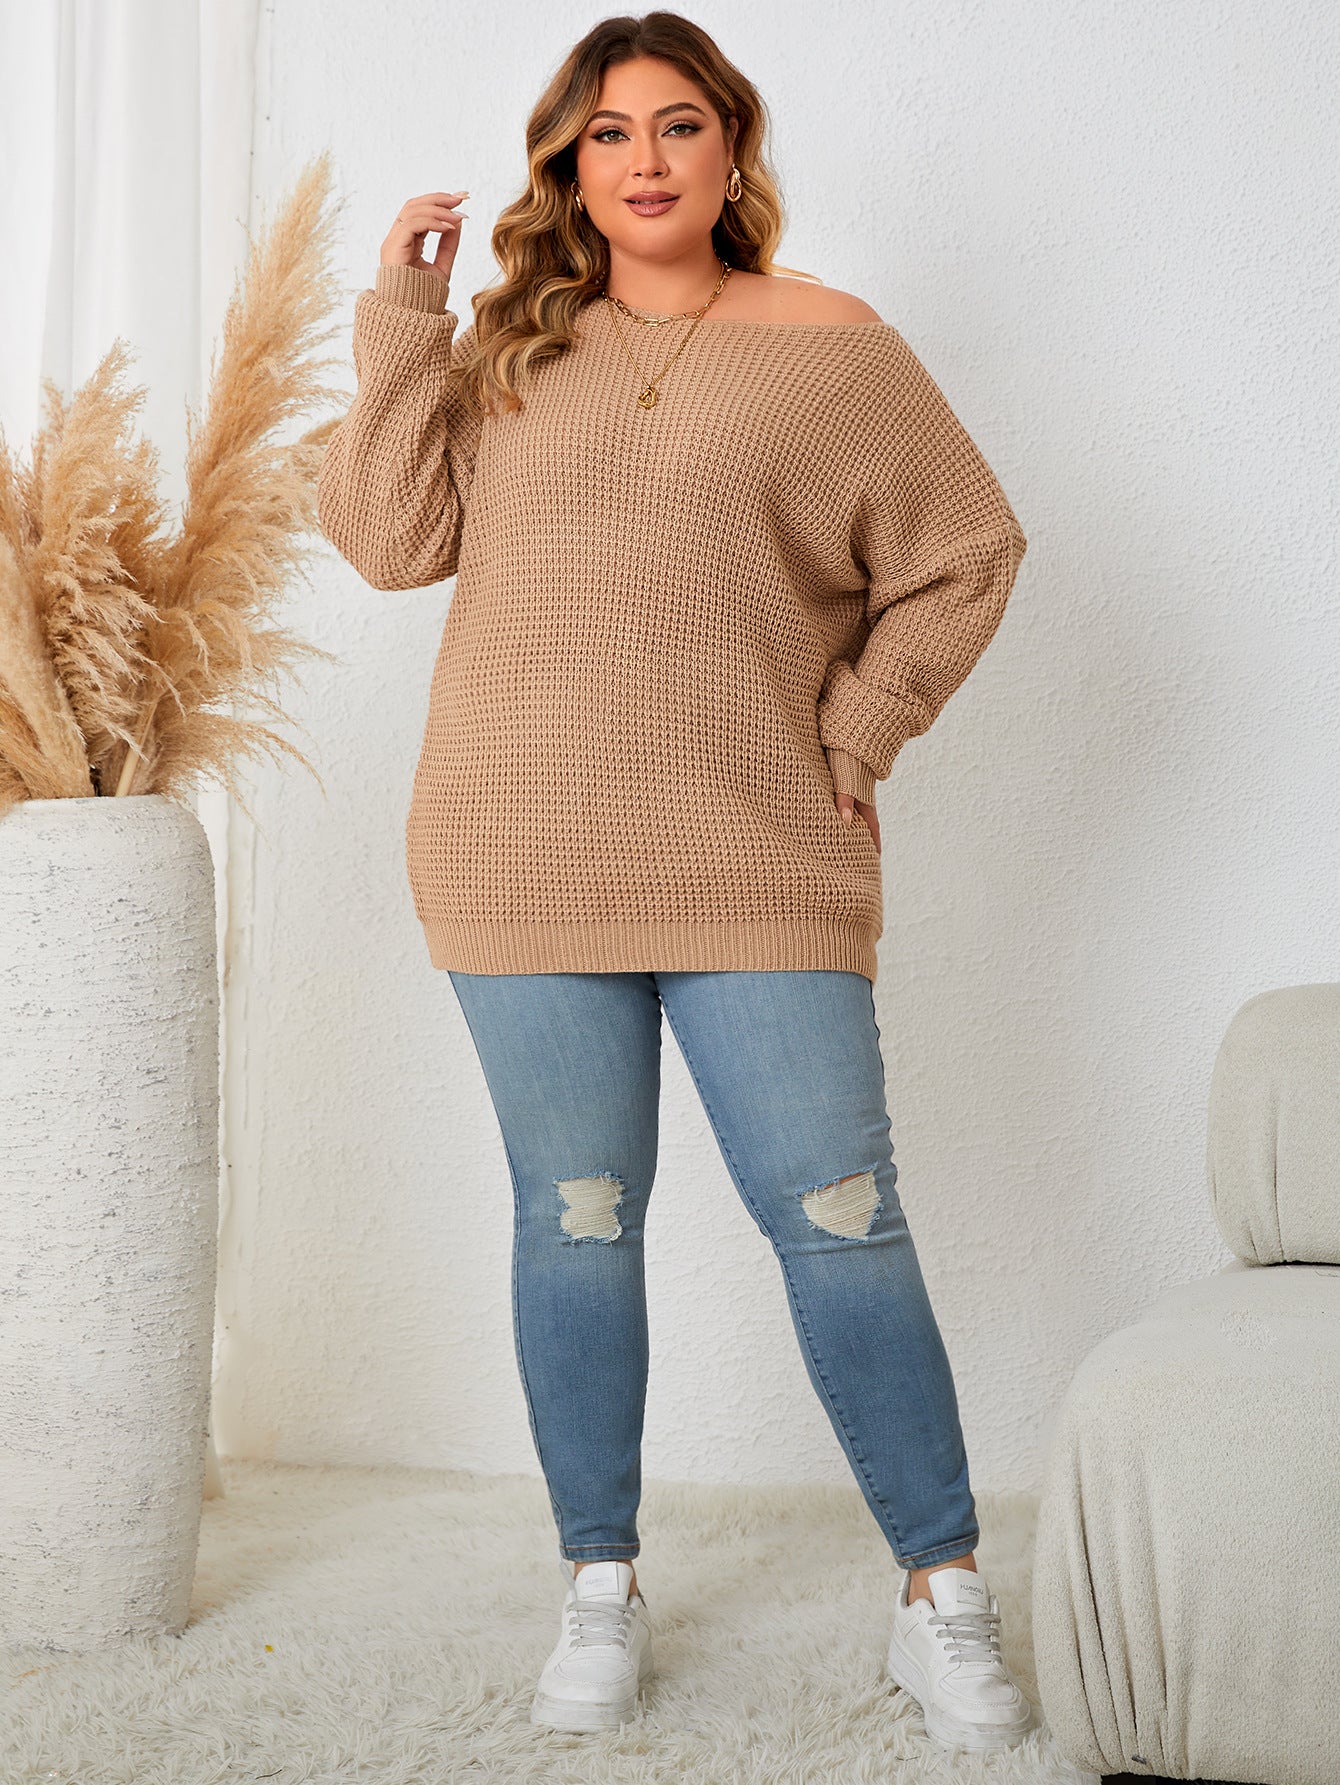 Plus-sized Loose Casual Solid Color Sweater For Women